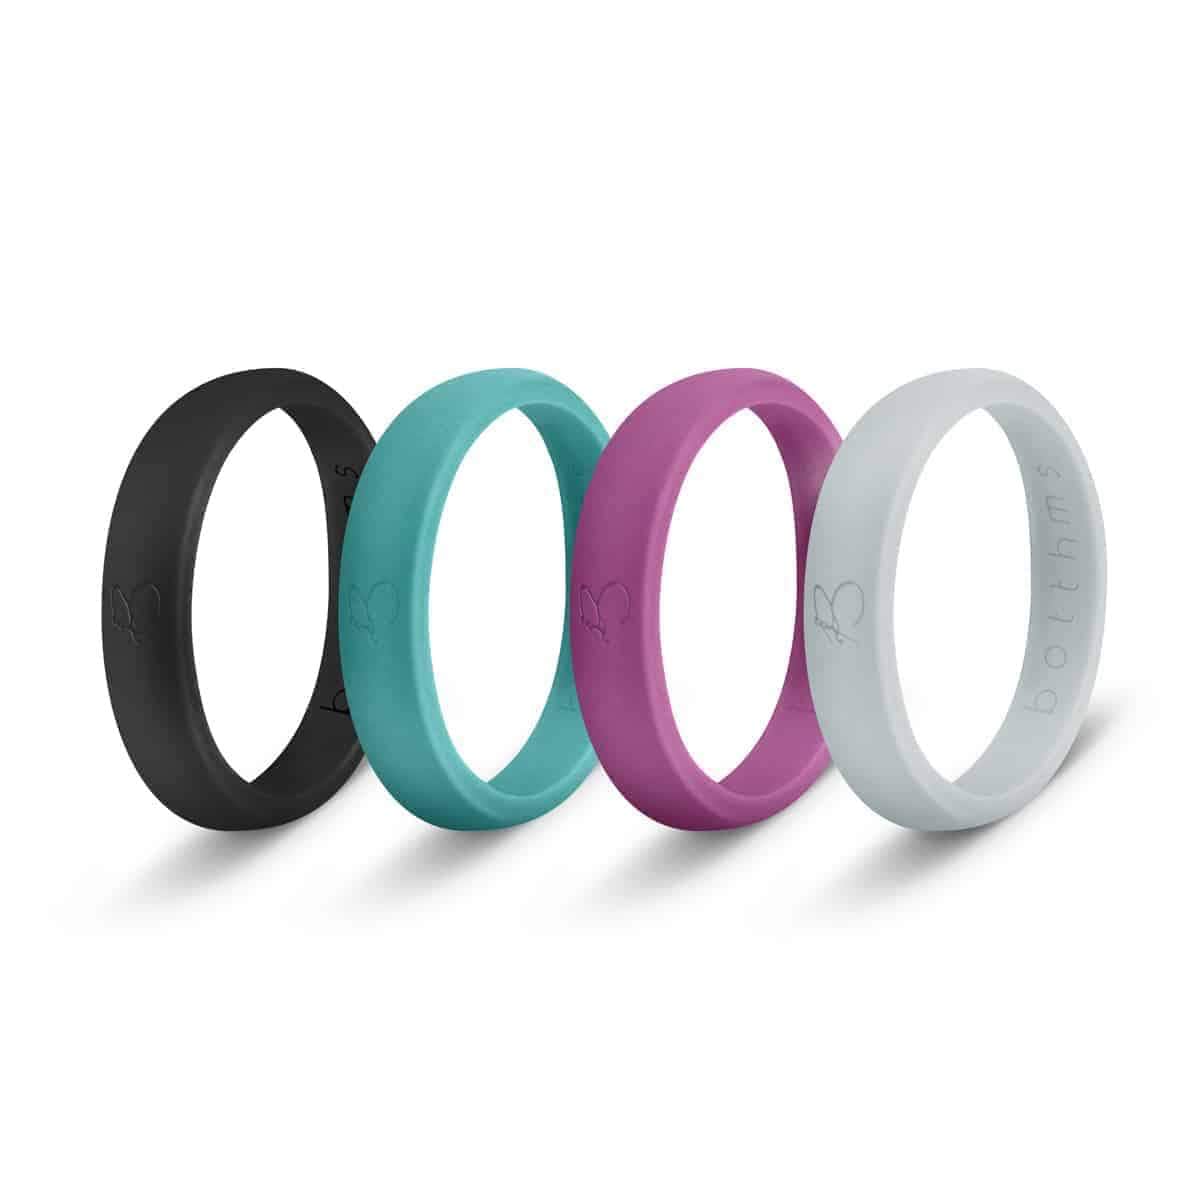 botthms botthms Ladies Silicone Rings Combo Pack - 4 Silicone Rings